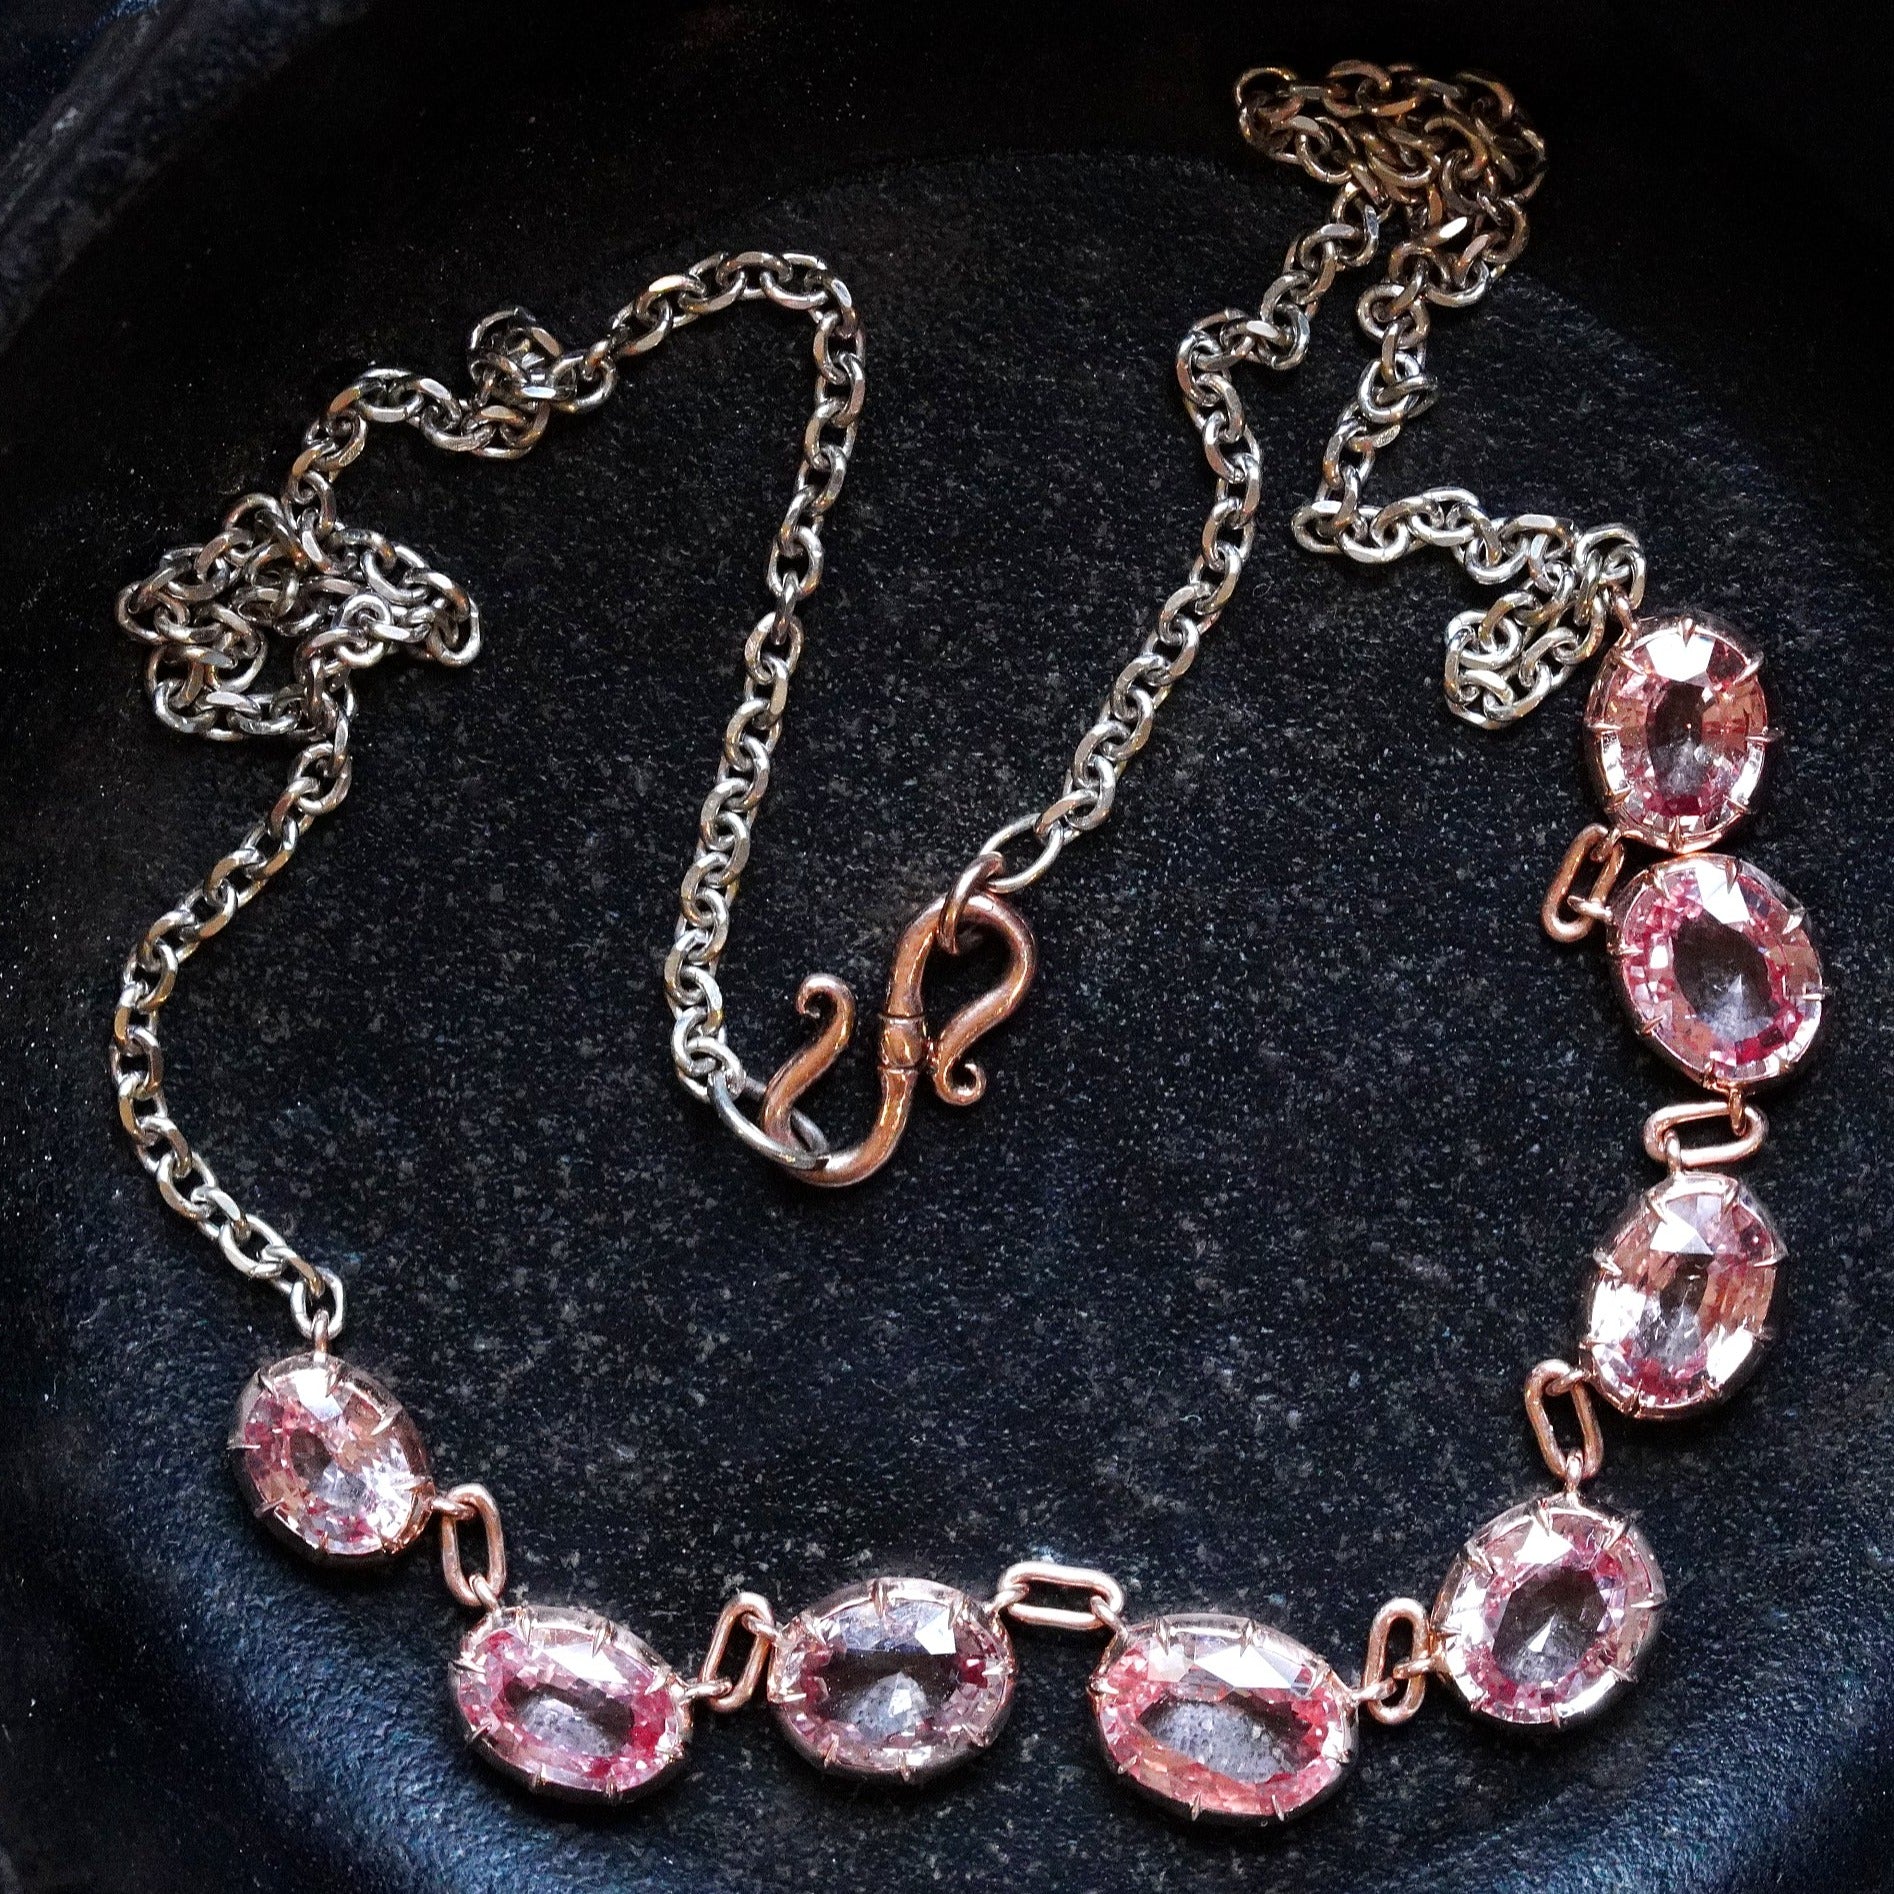 10.40-CT Oval Padparadscha Sapphire Necklace in 18K Rose Gold and Platinum